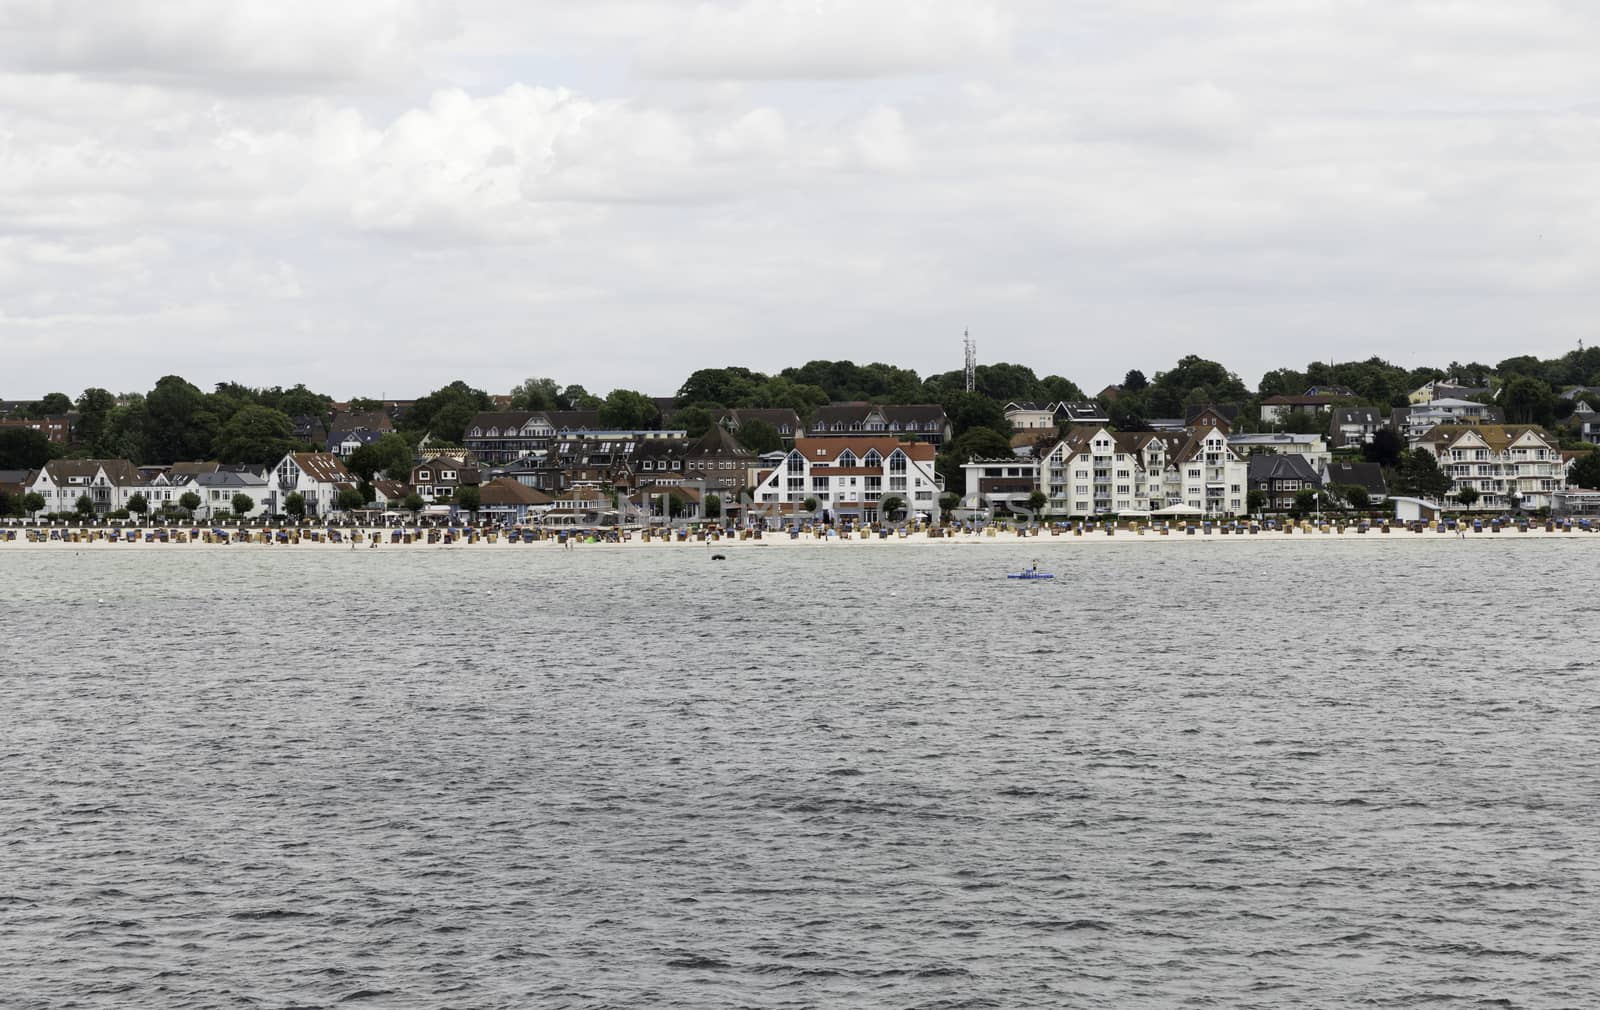 people on the beach with the houses of the german city Kiel as background